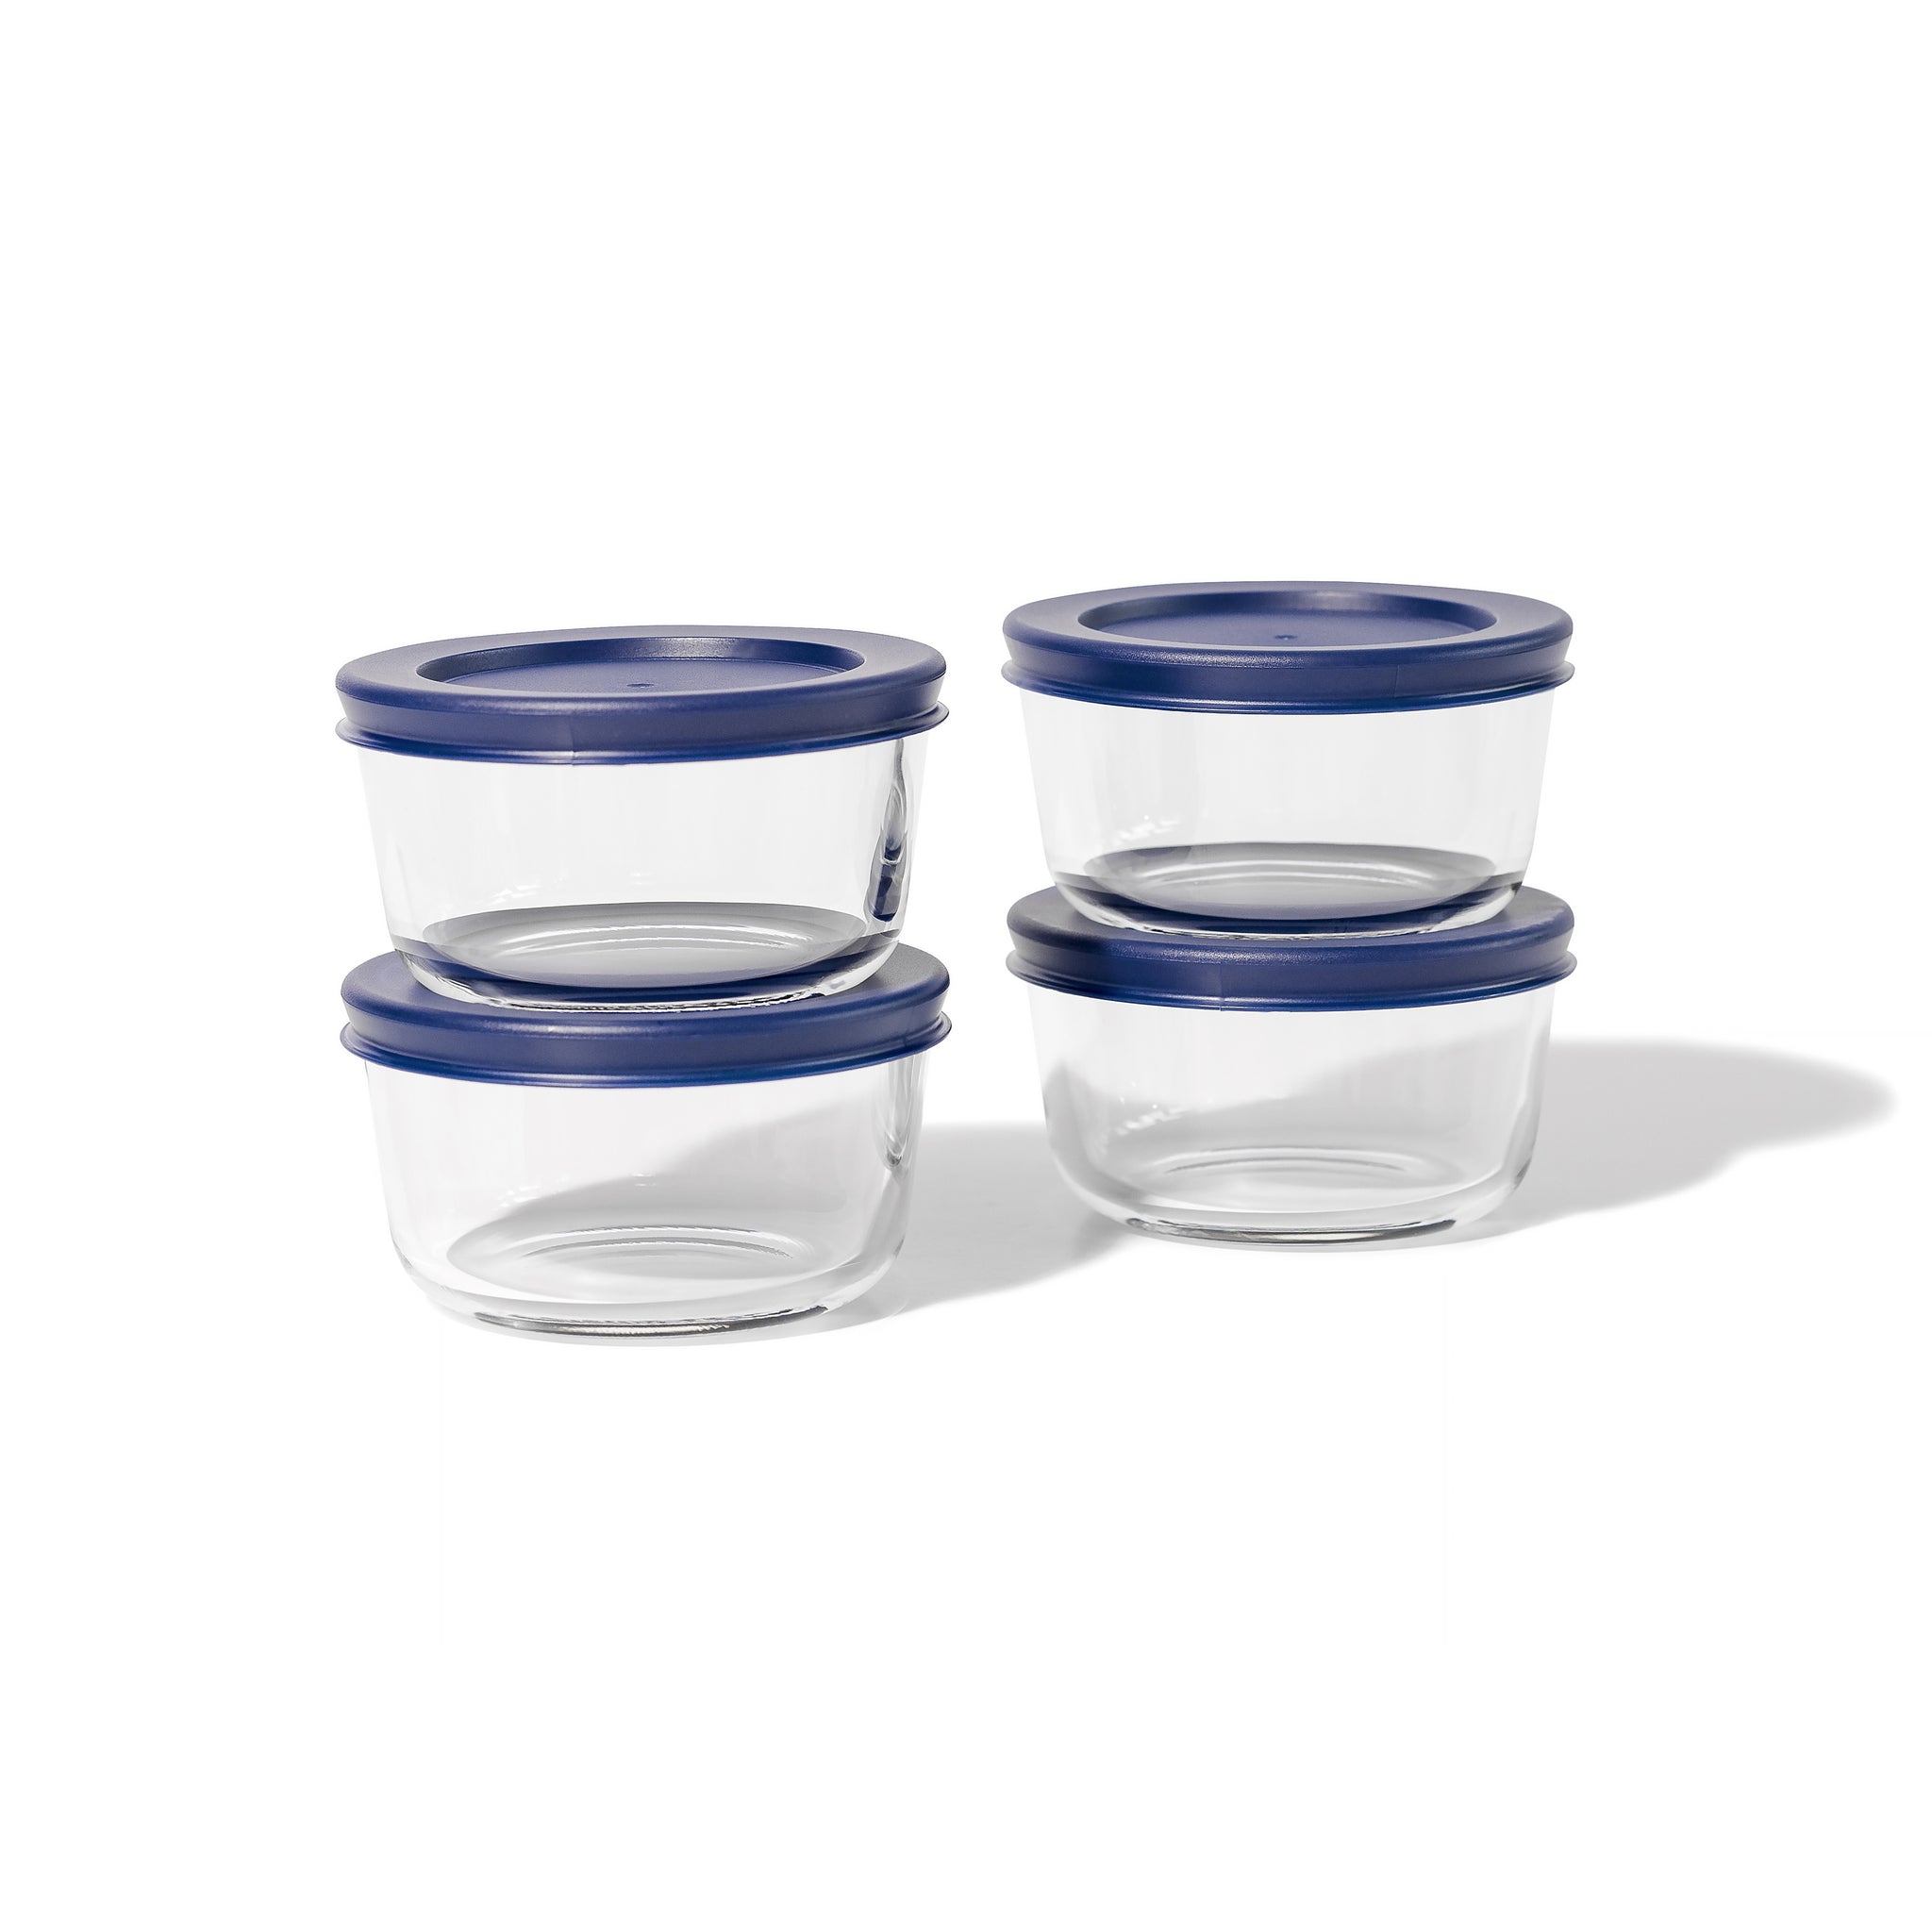 4 PIECE SET ROUND (1 CUP / 8.12OZ) ROUND GLASS BAKING DISHES WITH LIDS-NAVY BLUE